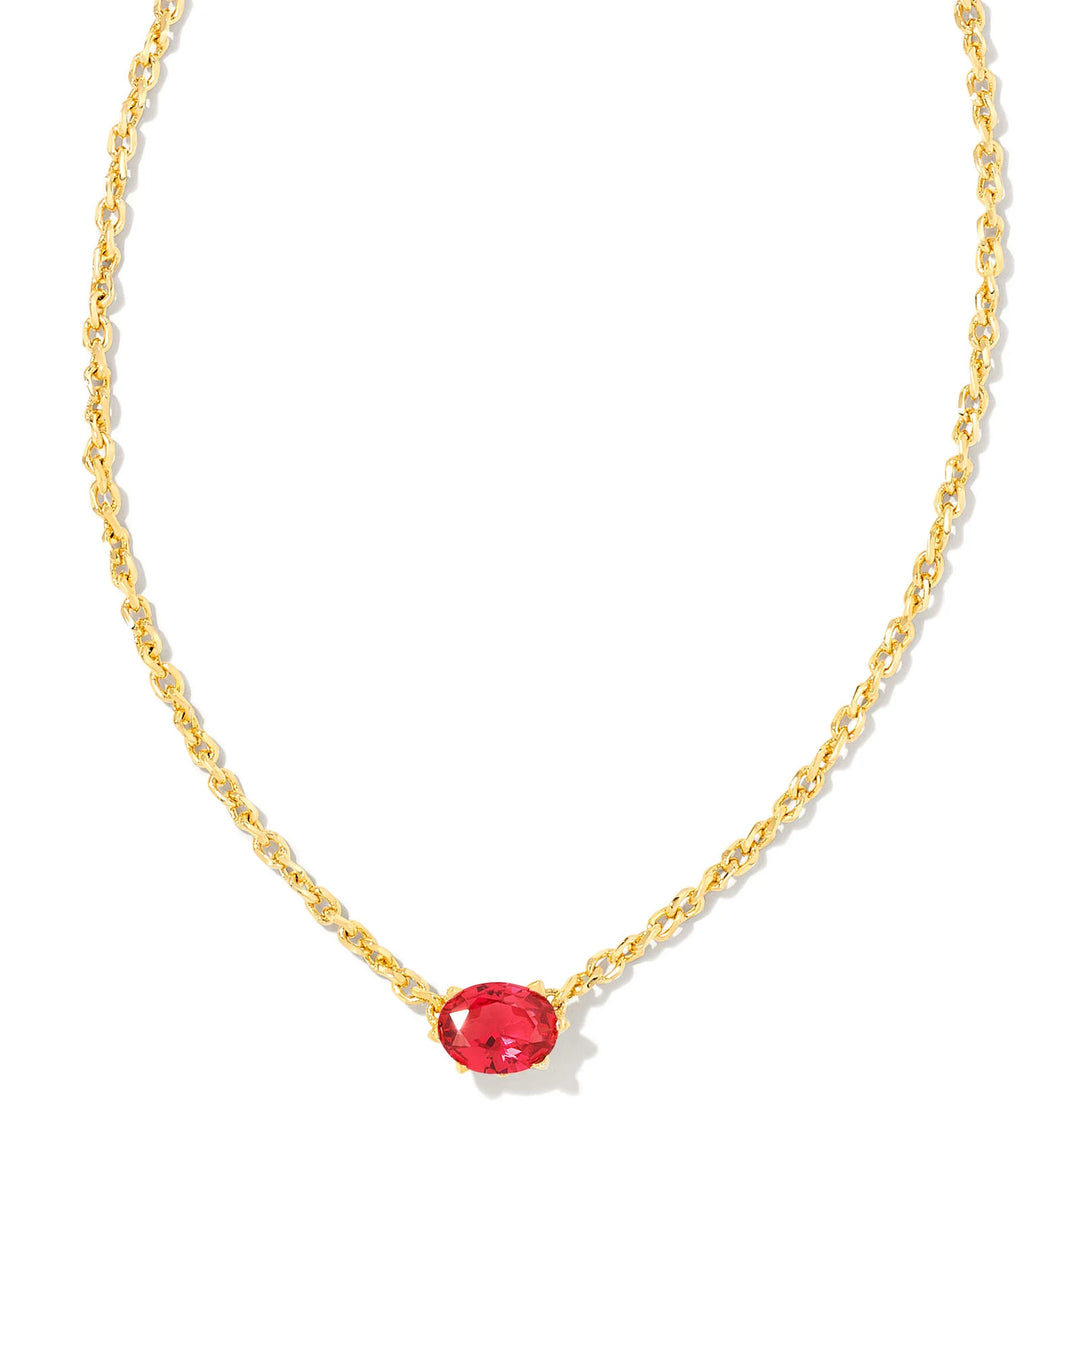 CAILIN CRYSTAL PENDANT NECKLACE - GOLD RED CRYSTAL